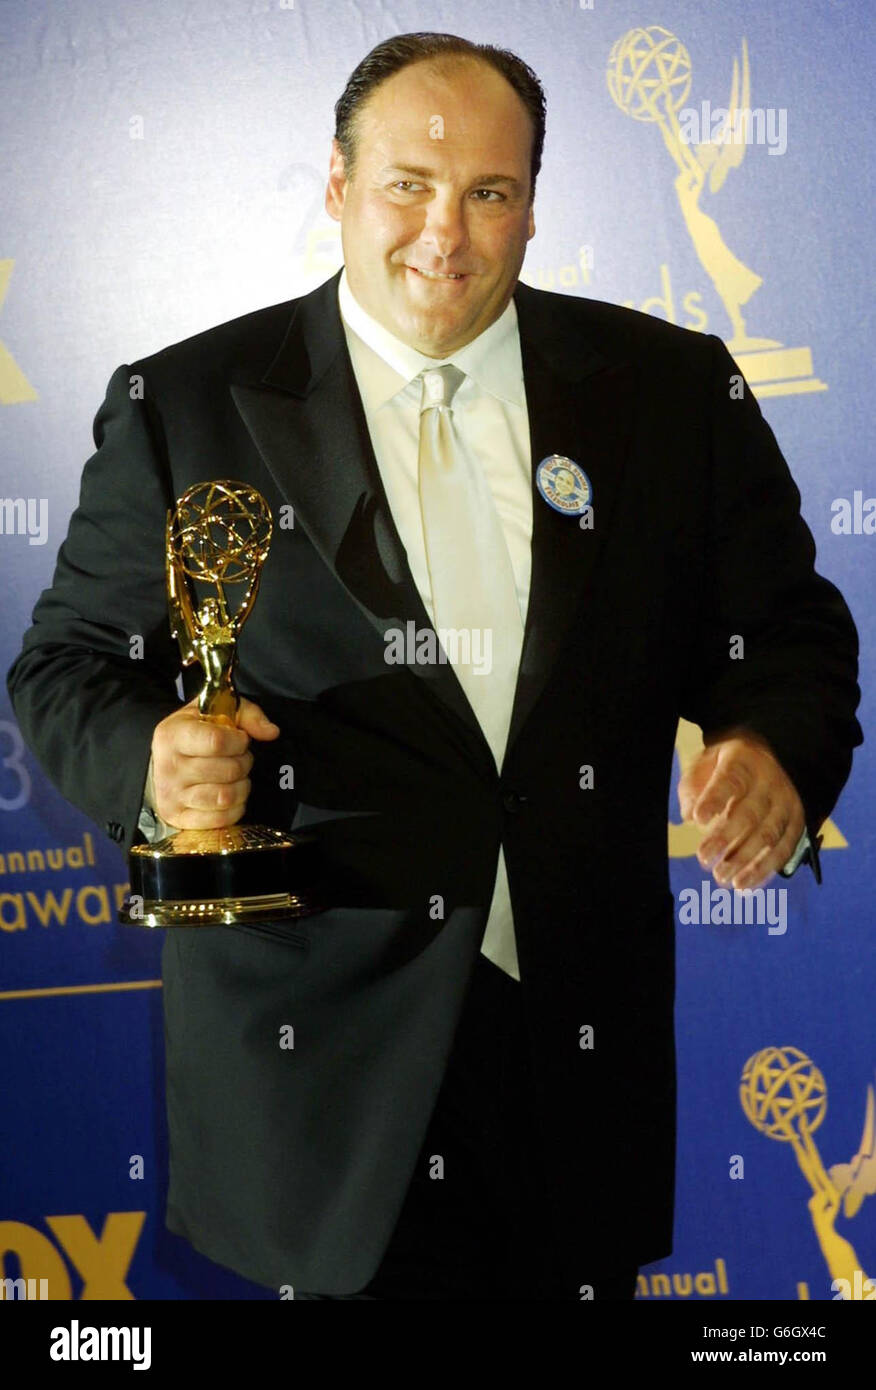 Actor James Gandolfini holds his award for outstanding lead actor in the drama series, 'The Sopranos' during the 55th Annual Primetime Emmy Awards at the Shrine Auditorium in Los Angeles. Stock Photo